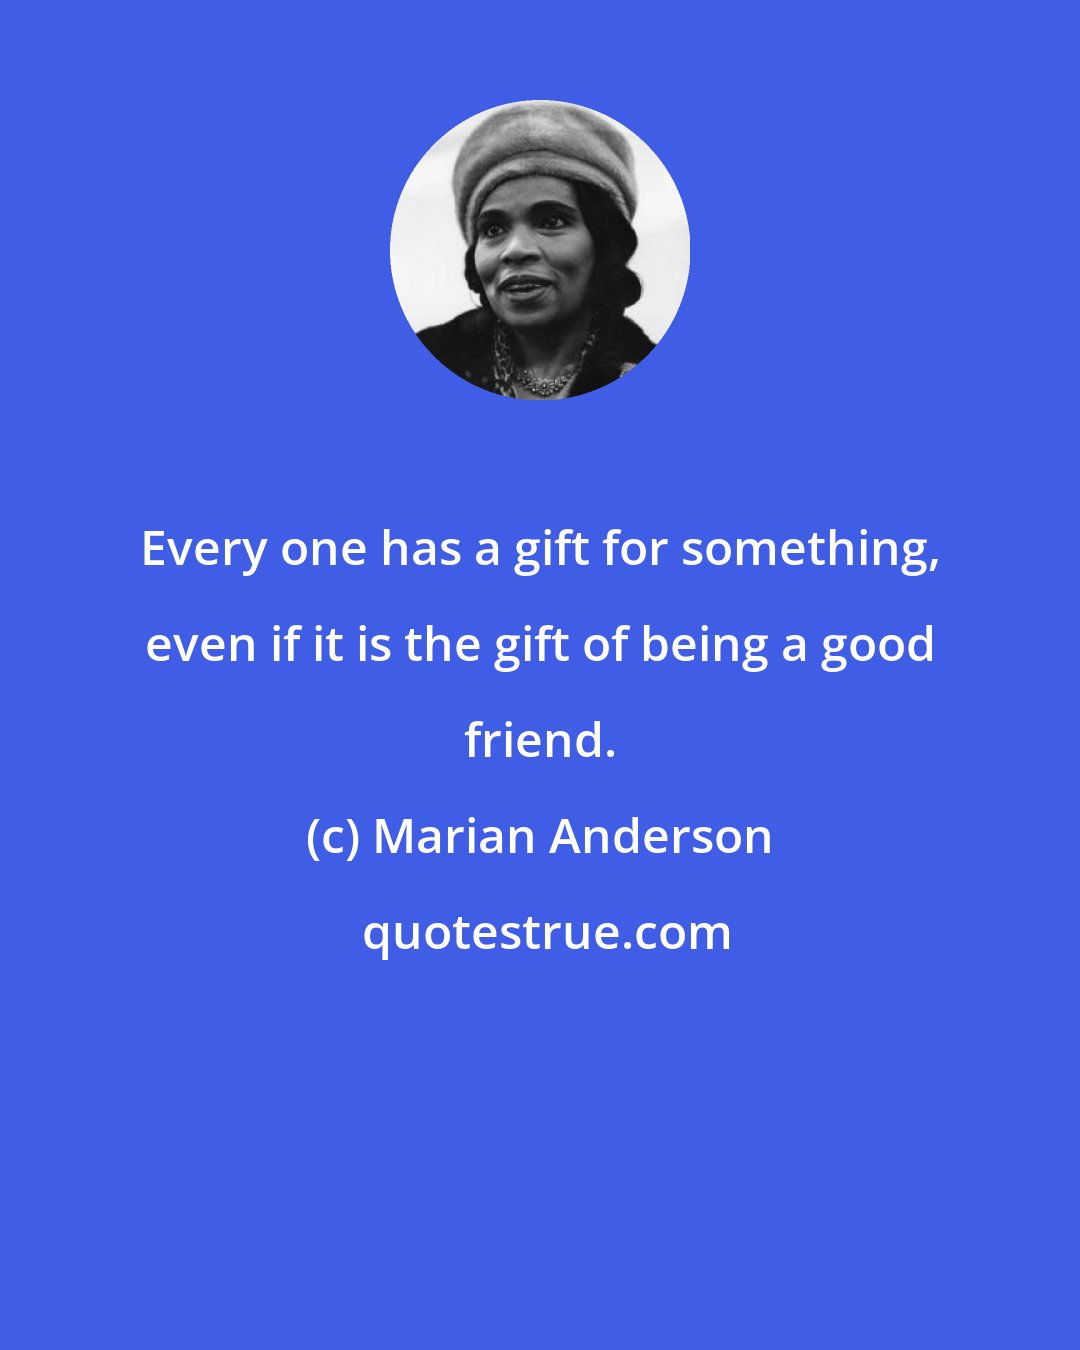 Marian Anderson: Every one has a gift for something, even if it is the gift of being a good friend.